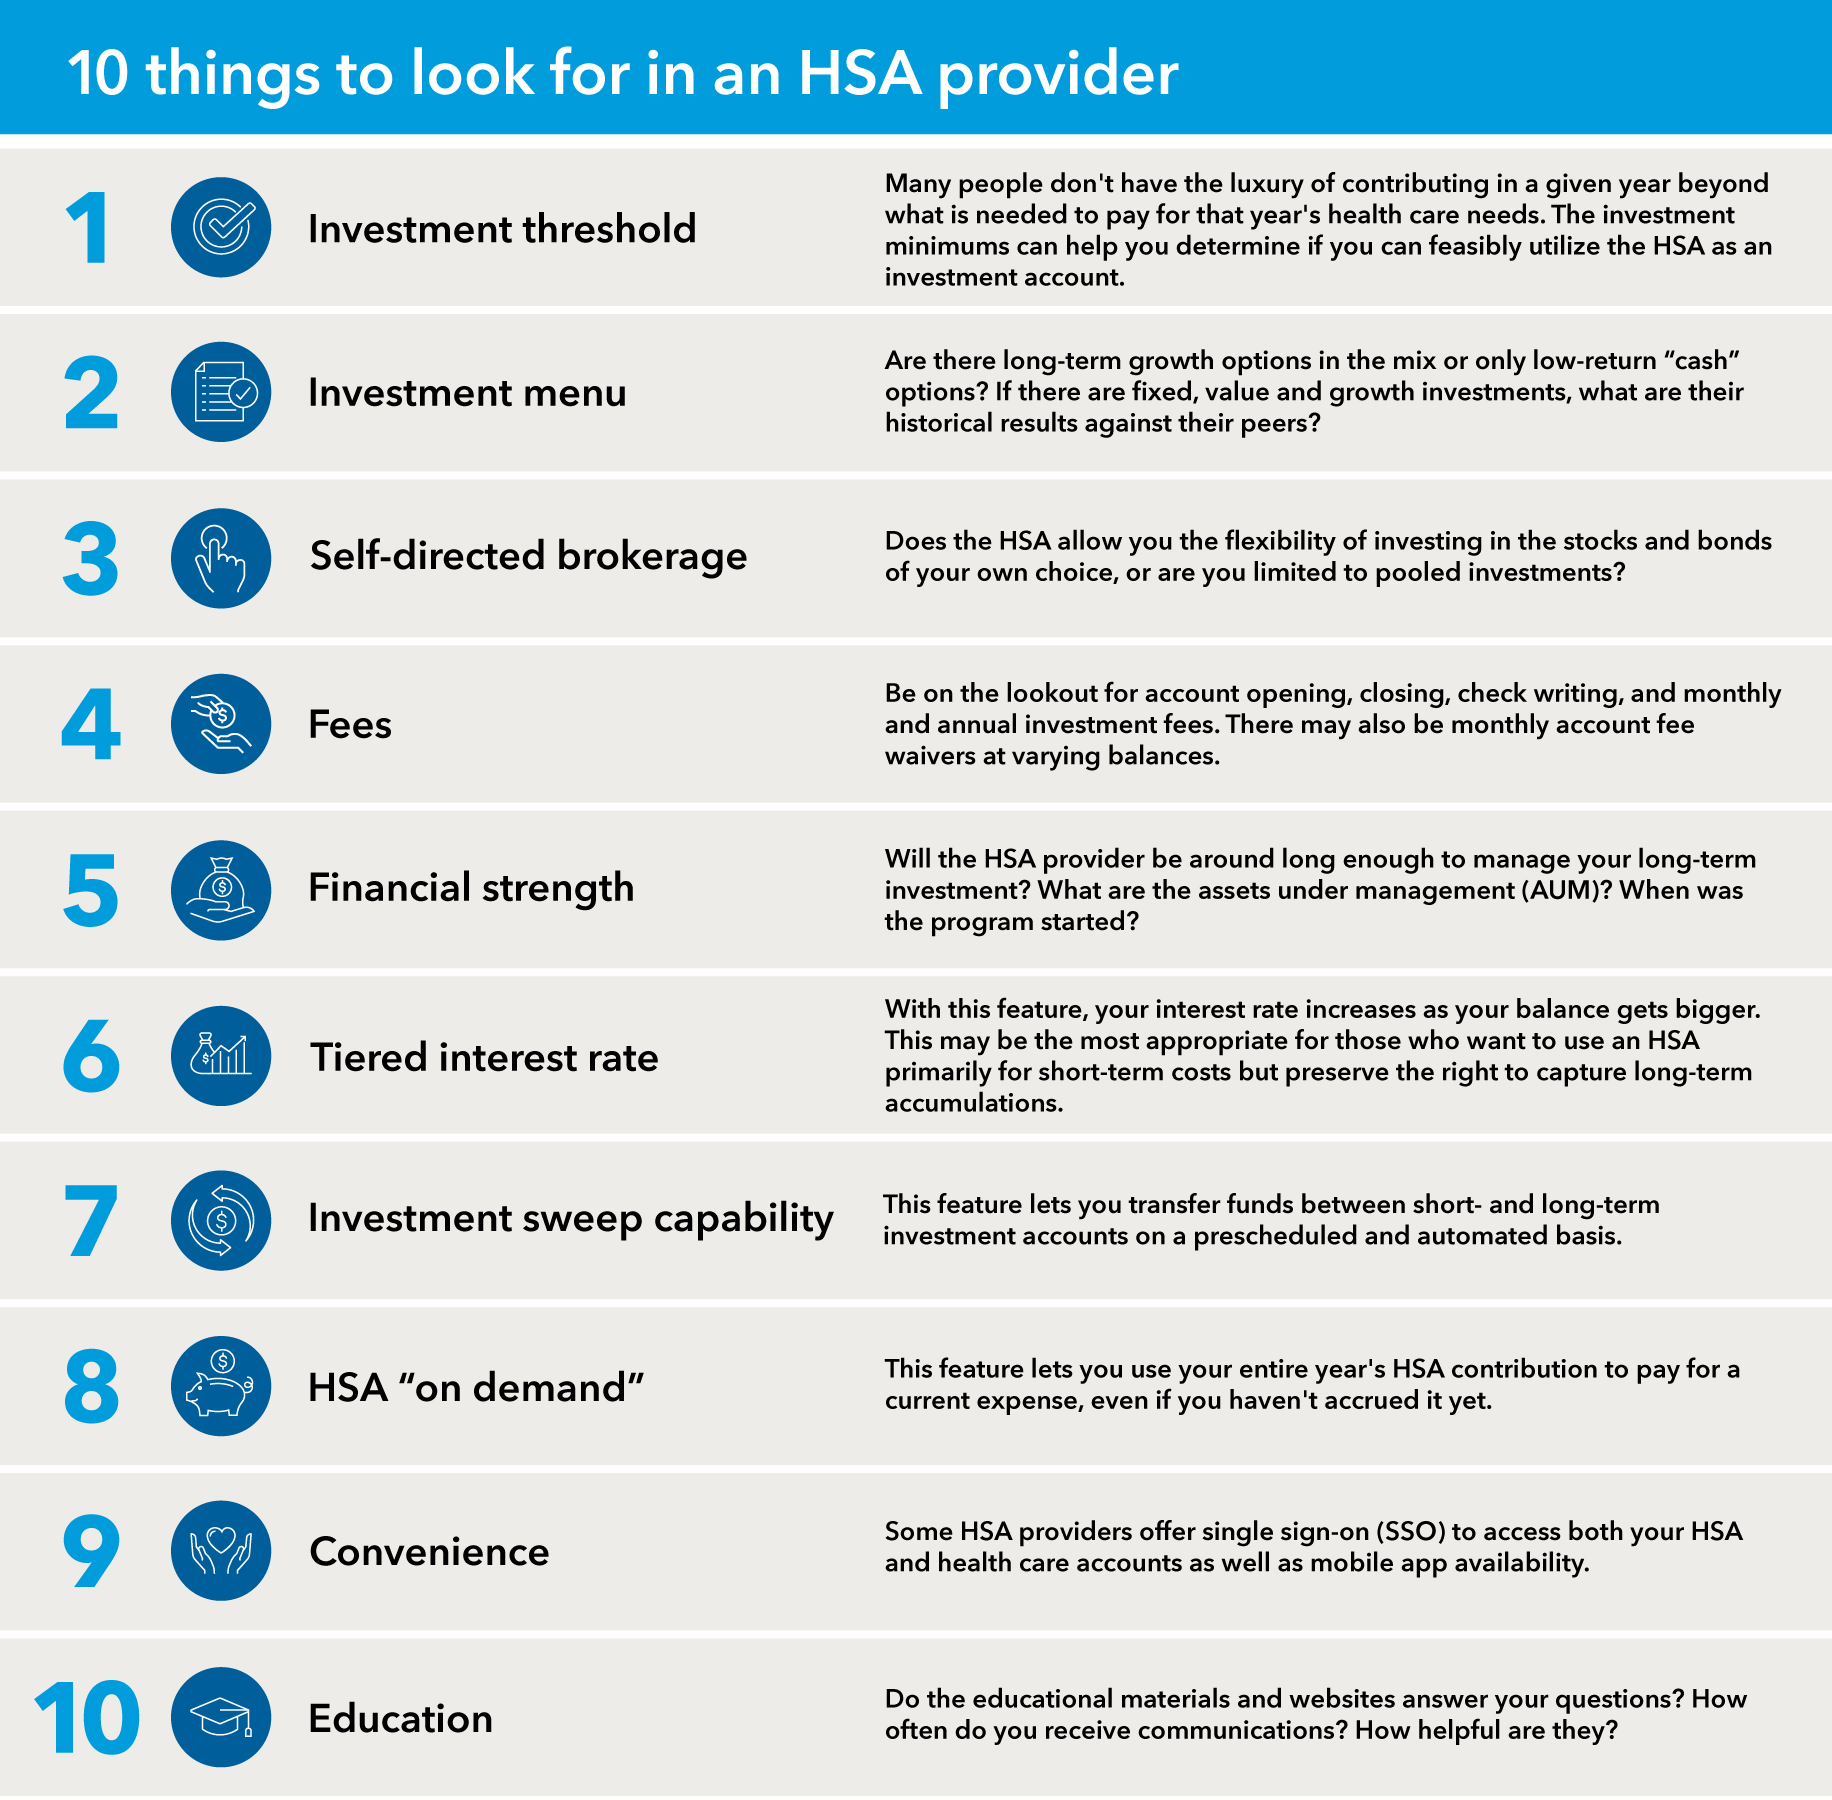 The infographic details 10 things to look for in an HSA provider. They are as follows. One, investment threshold. Many people don't have the luxury of contributing in a given year beyond what is needed to pay for that year's health care needs. The investment minimums can help you determine if you can feasibly utilize the HSA as an investment account. Two, investment menu. Are there long-term growth options in the mix or only low-return “cash” options? If there are fixed, value and growth investments, what are their historical results against their peers? Three, self-directed brokerage. Does the HSA allow you the flexibility of investing in the stocks and bonds of your own choice, or are you limited to pooled investments? Four, fees. Be on the lookout for account opening, closing, check writing, and monthly and annual investment fees. There may also be monthly account fee waivers at varying balances. Five, financial strength. Will the HSA provider be around long enough to manage your long-term investment? What are the assets under management (AUM)? When was the program started? Six, tiered interest rate. With this feature, your interest rate increases as your balance gets bigger. This may be the most appropriate for those who want to use an HSA primarily for short-term costs but preserve the right to capture long-term accumulations. Seven, investment sweep capability. This feature lets you transfer funds between short- and long-term investment accounts on a prescheduled and automated basis. Eight, HSA “on demand.” This feature lets you use your entire year’s HSA contribution to pay for a current expense, even if you haven’t accrued it yet. Nine, convenience. Some HSA providers offer single sign-on (SSO) to access both your HSA and health care accounts as well as mobile app availability. Ten, education. Do the educational materials and websites answer your questions? How often do you receive communications? How helpful are they?